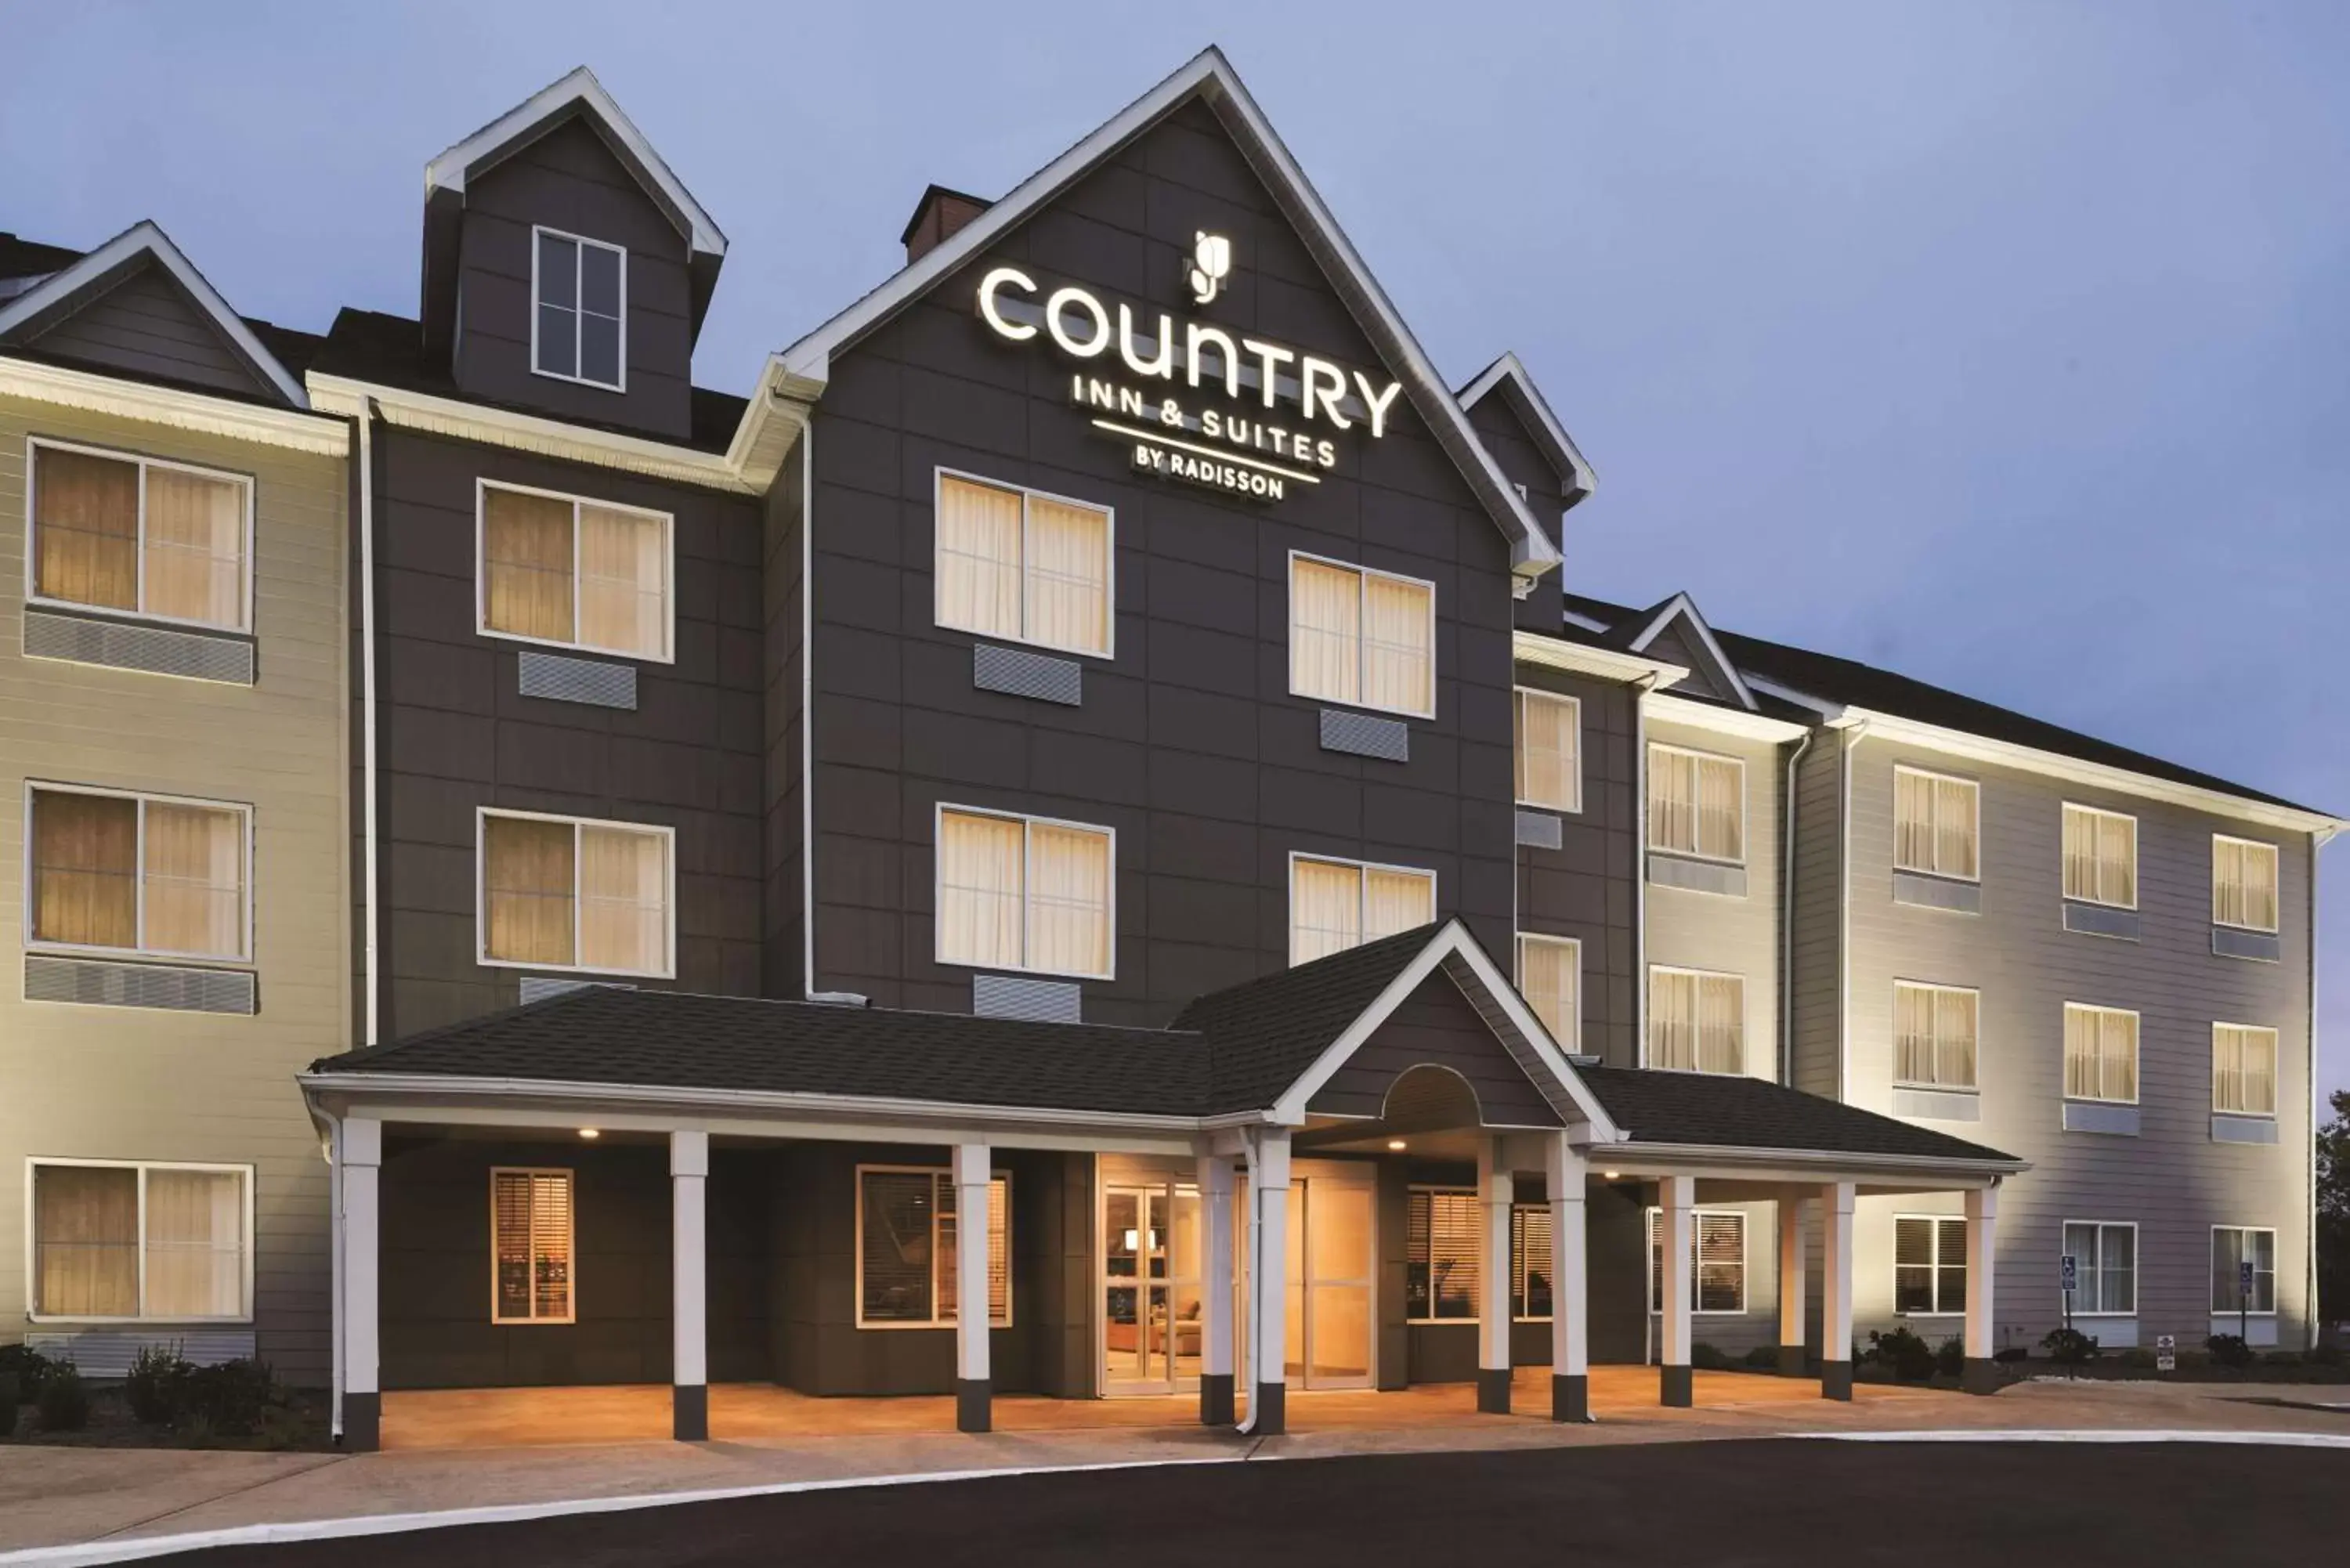 Property Building in Country Inn & Suites by Radisson, Indianapolis South, IN